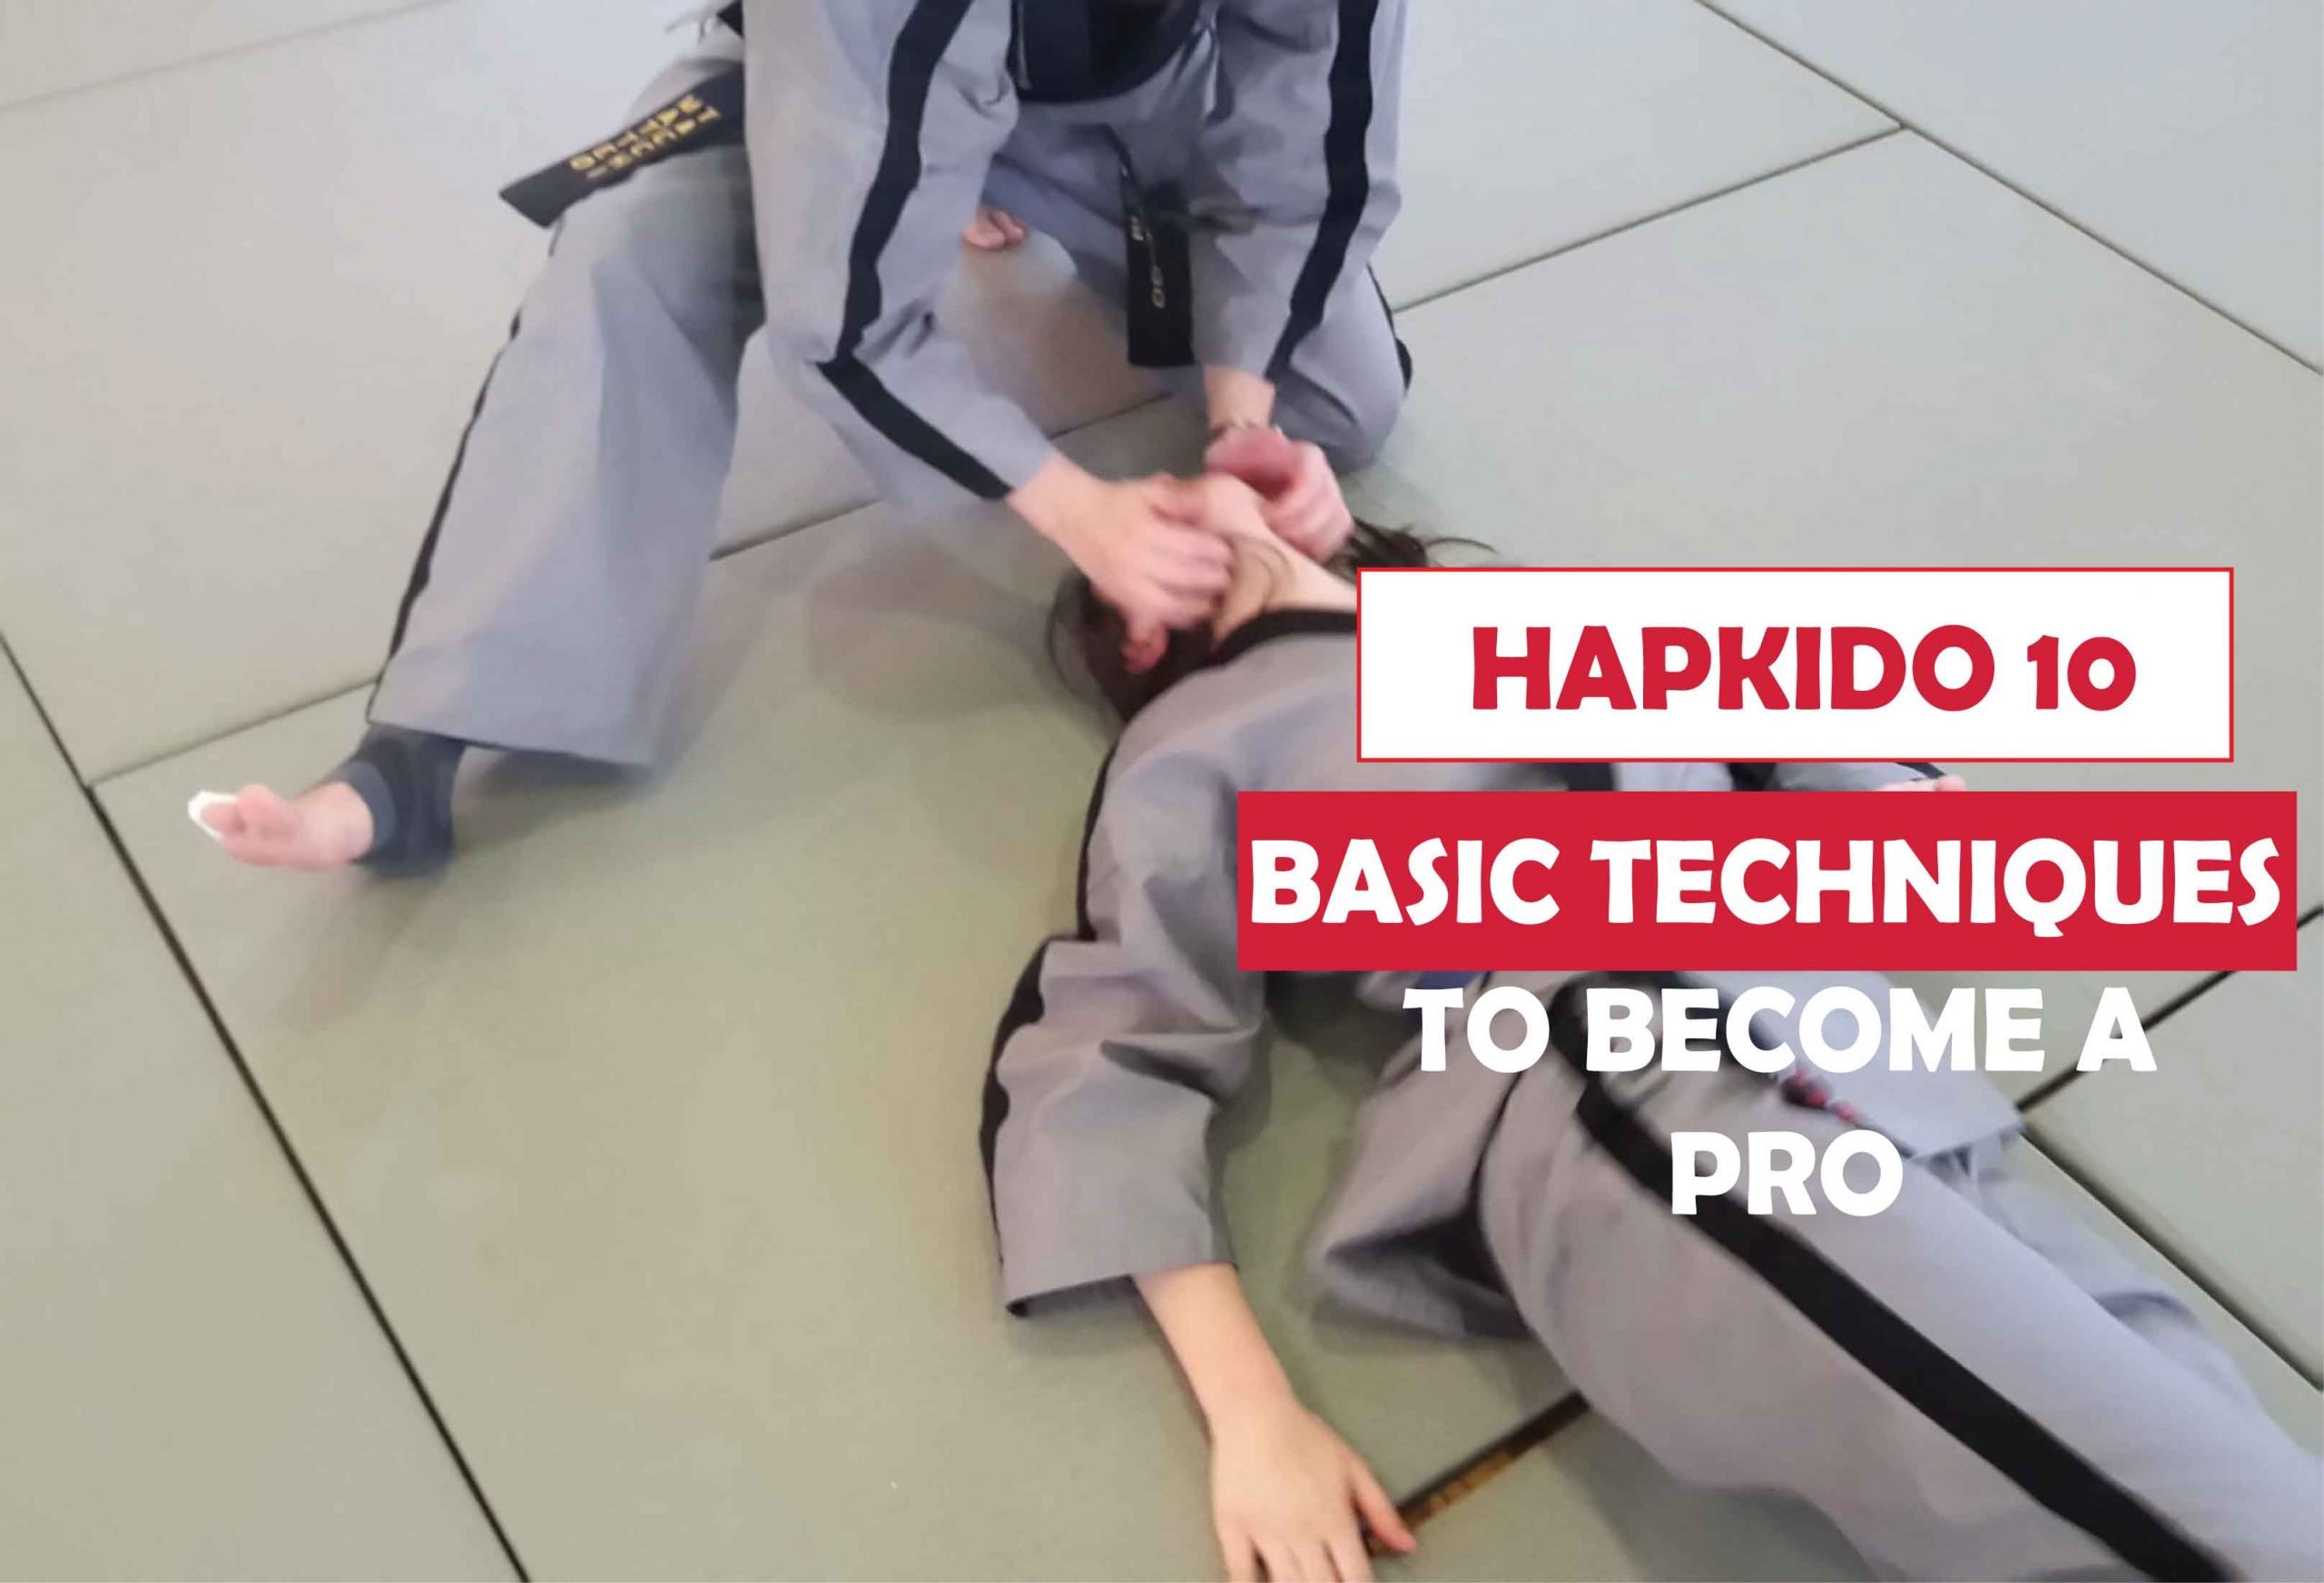 Hapkido 10 Basic Techniques To Become a Pro